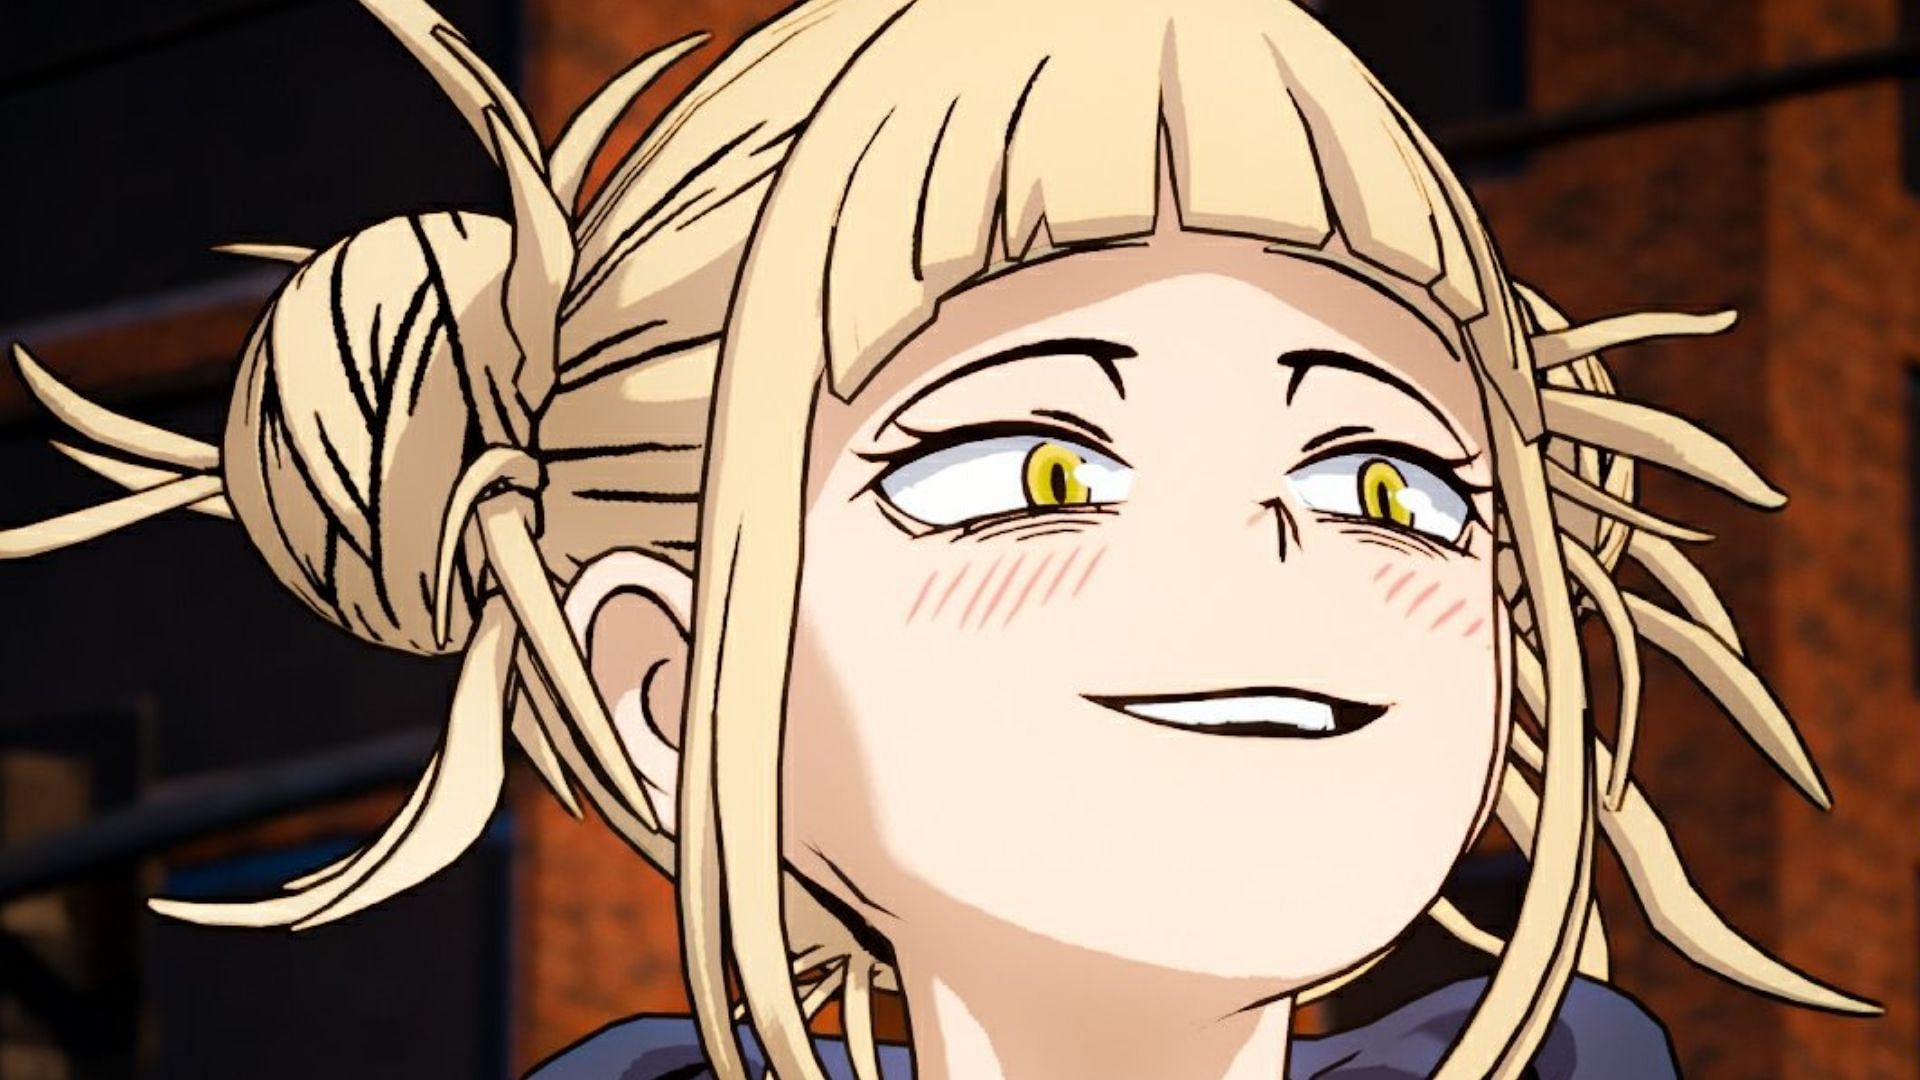 &quot;So it begins...&quot;: Fortnite community reacts to the popularity of new Himiko Toga outfit